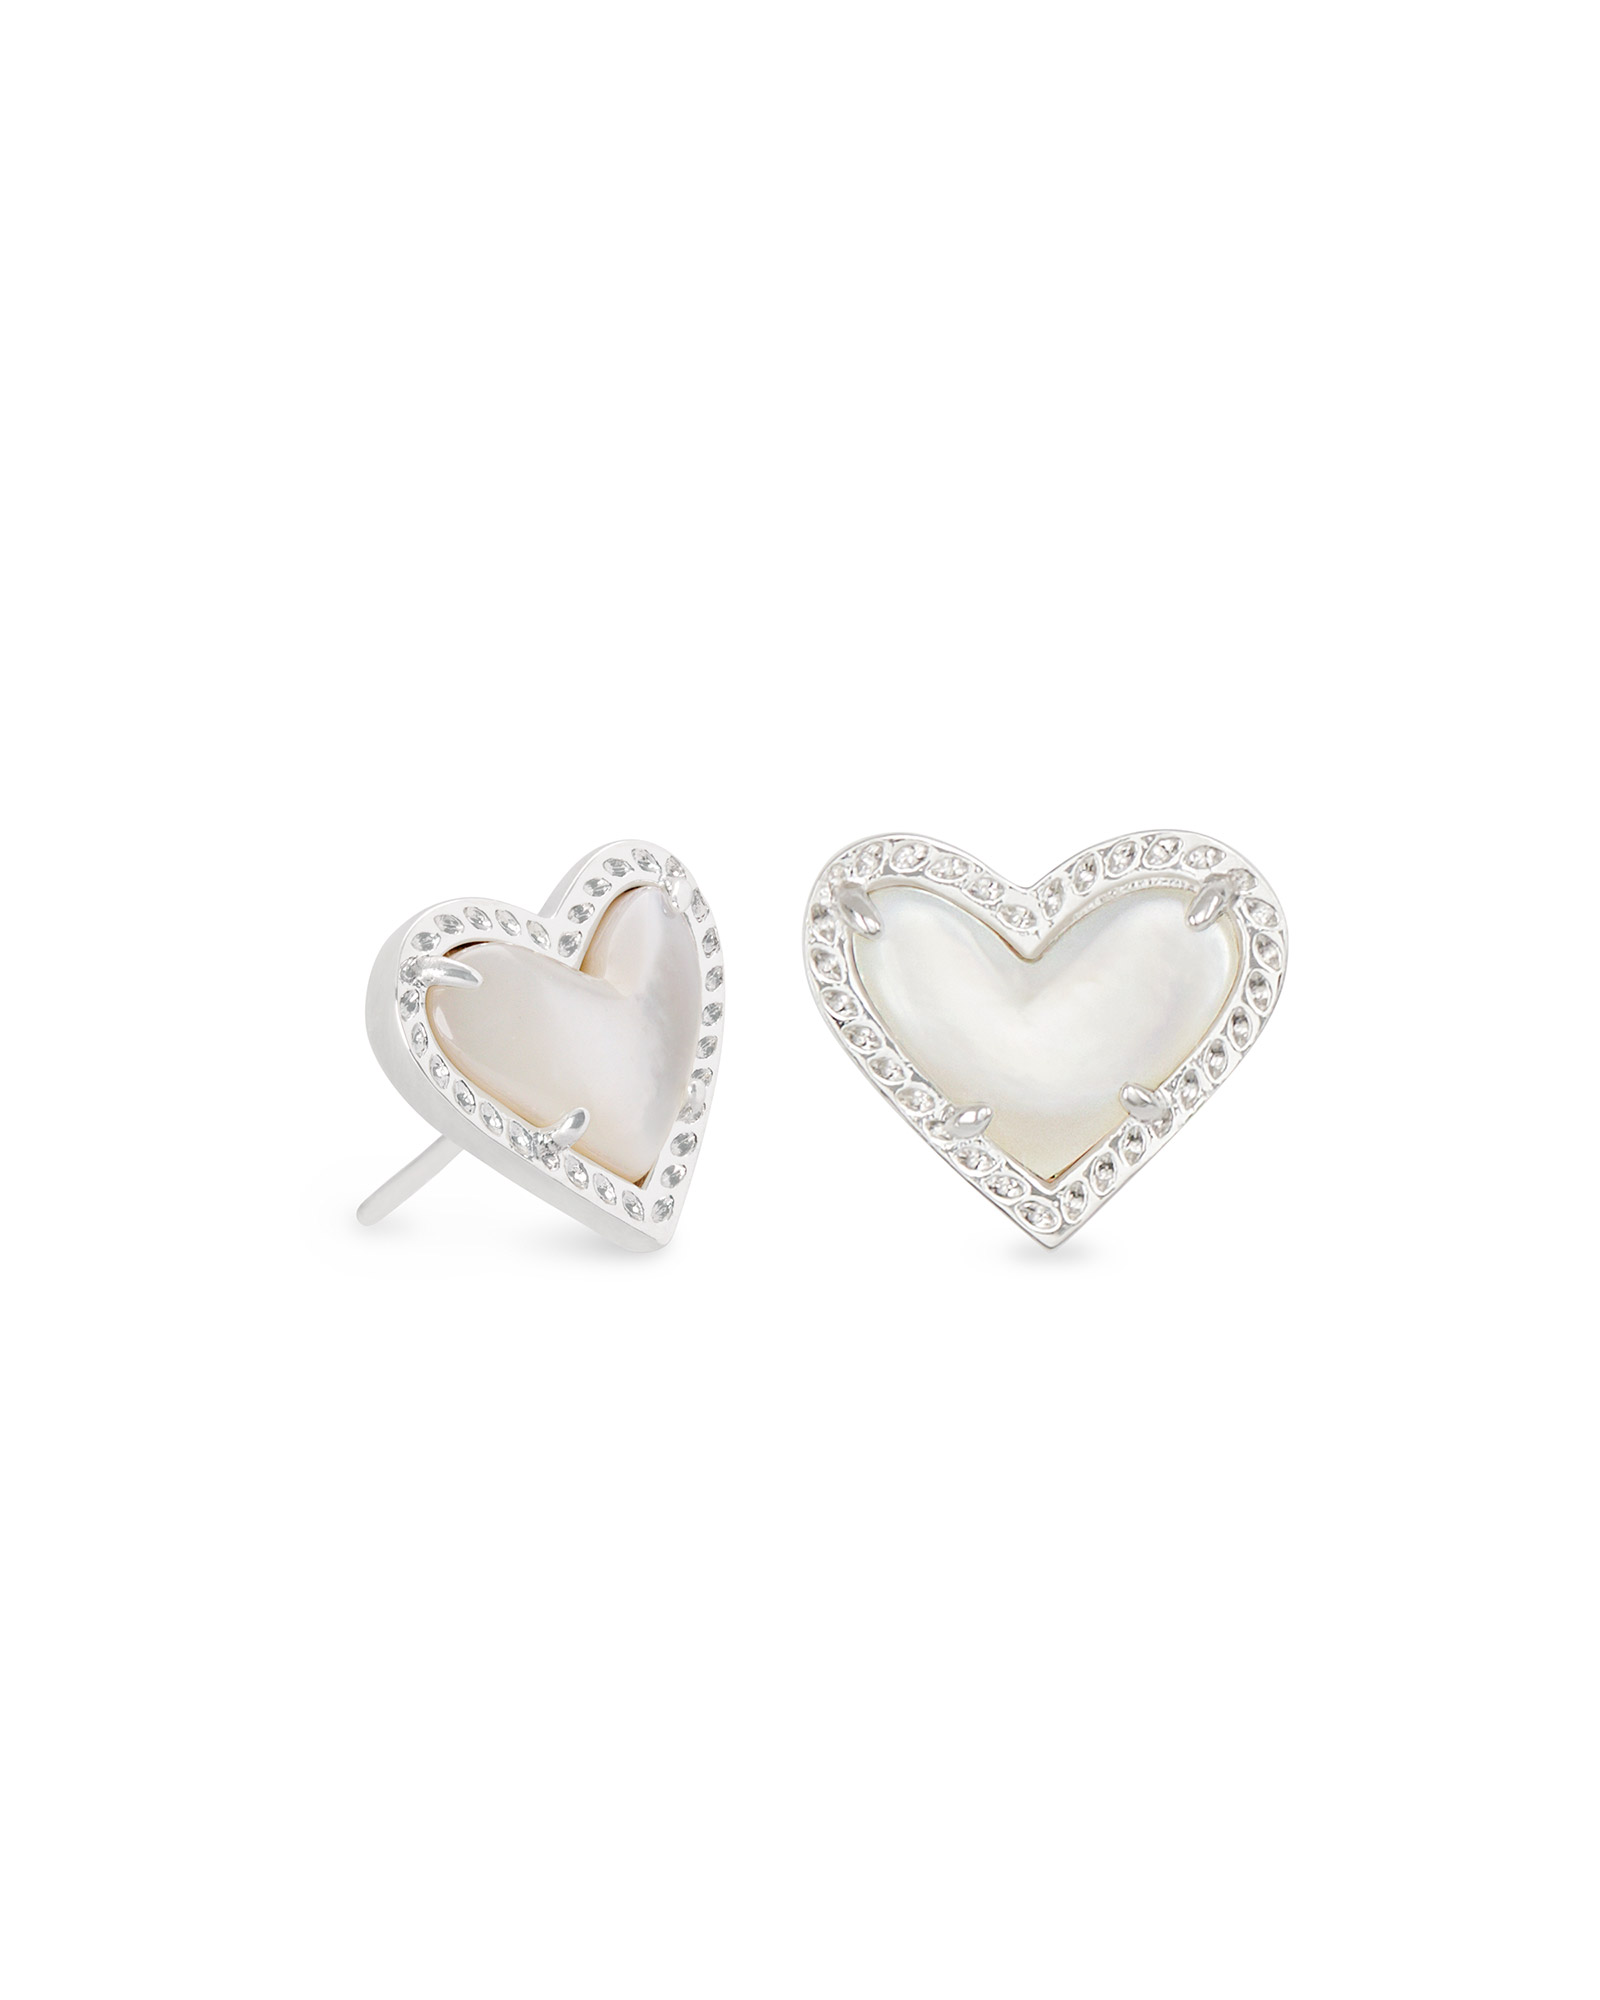 KENDRA SCOTT ARI COLLECTION RHODIUM PLATED BRASS FASHION HEART STUD EARRINGS WITH IVORY MOTHER OF PEARL